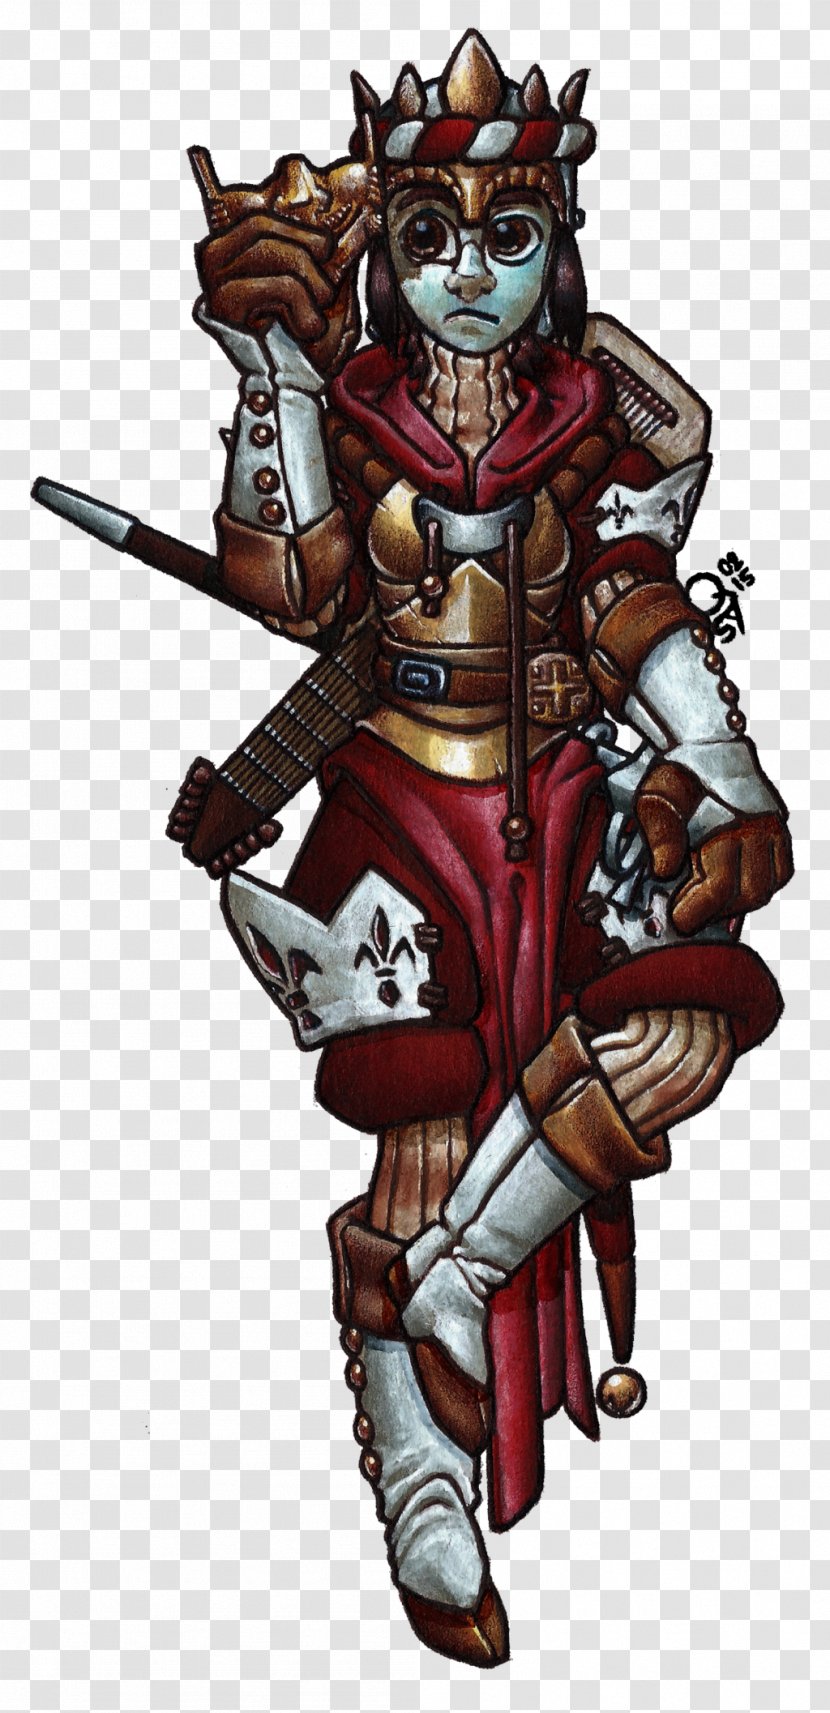 Warrior Spear Mercenary Knight - Mythical Creature Transparent PNG